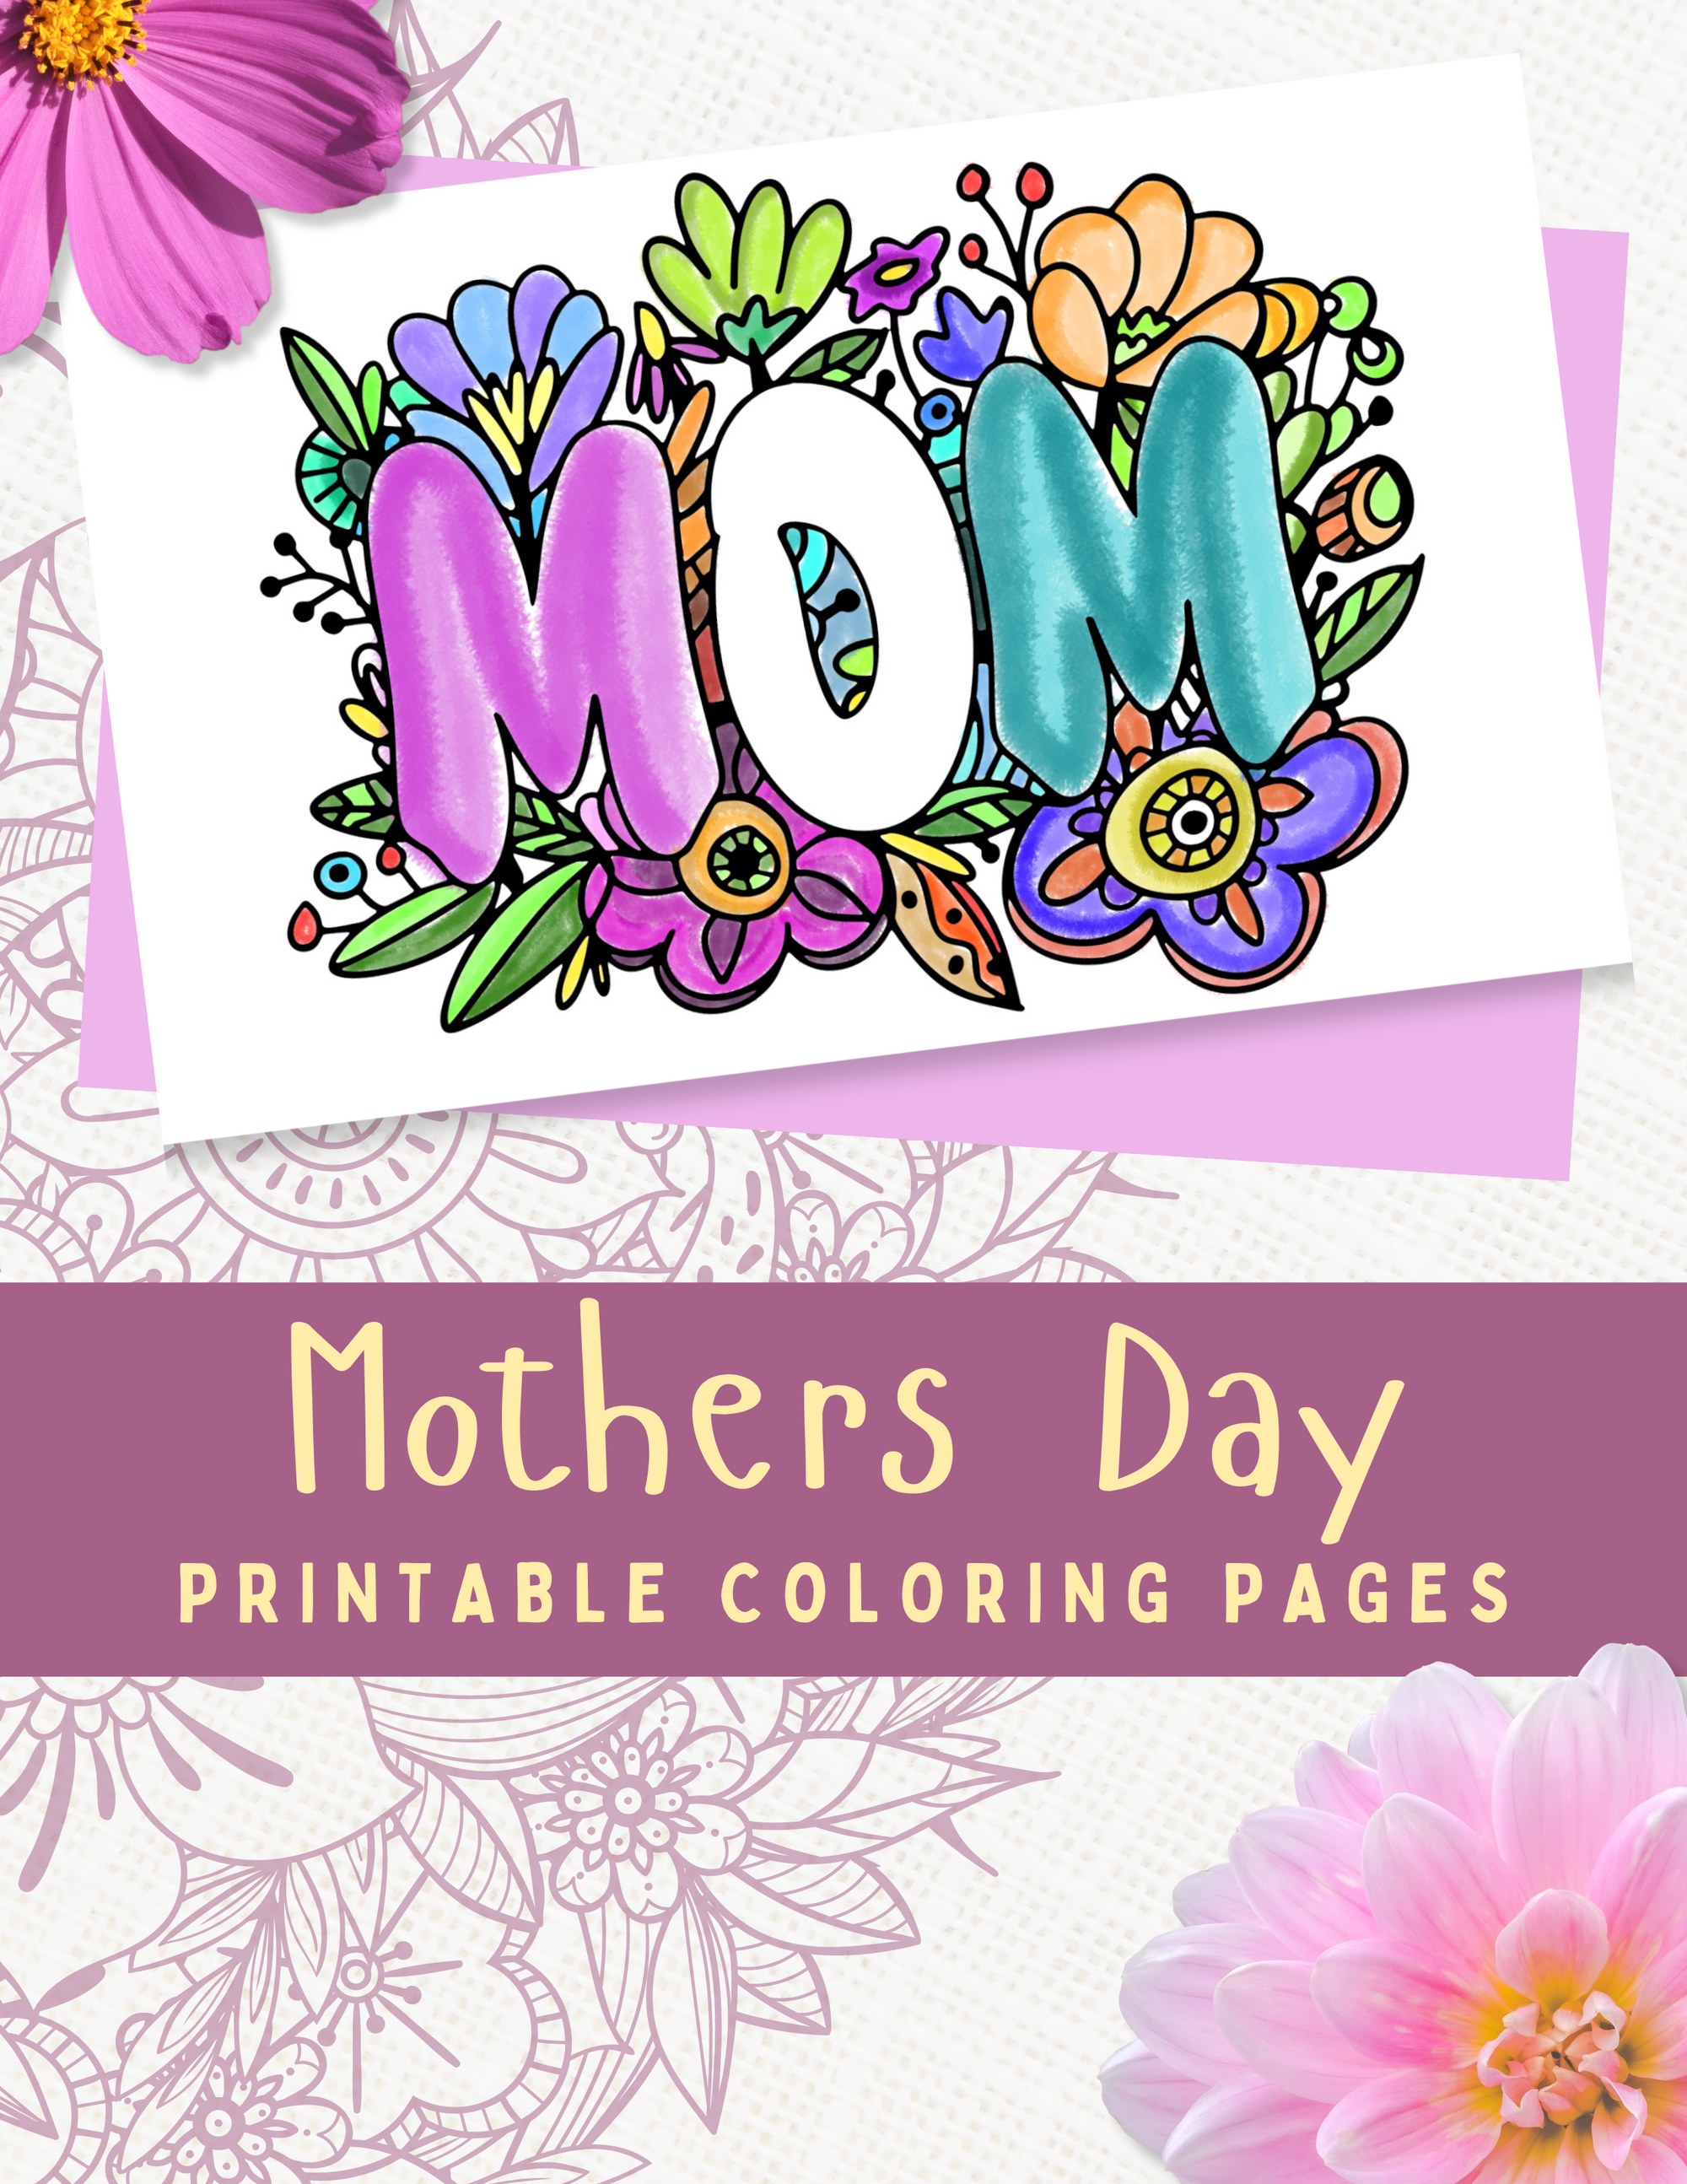 Mother's Day Blossoms - Heartwarming Printable Coloring Pages